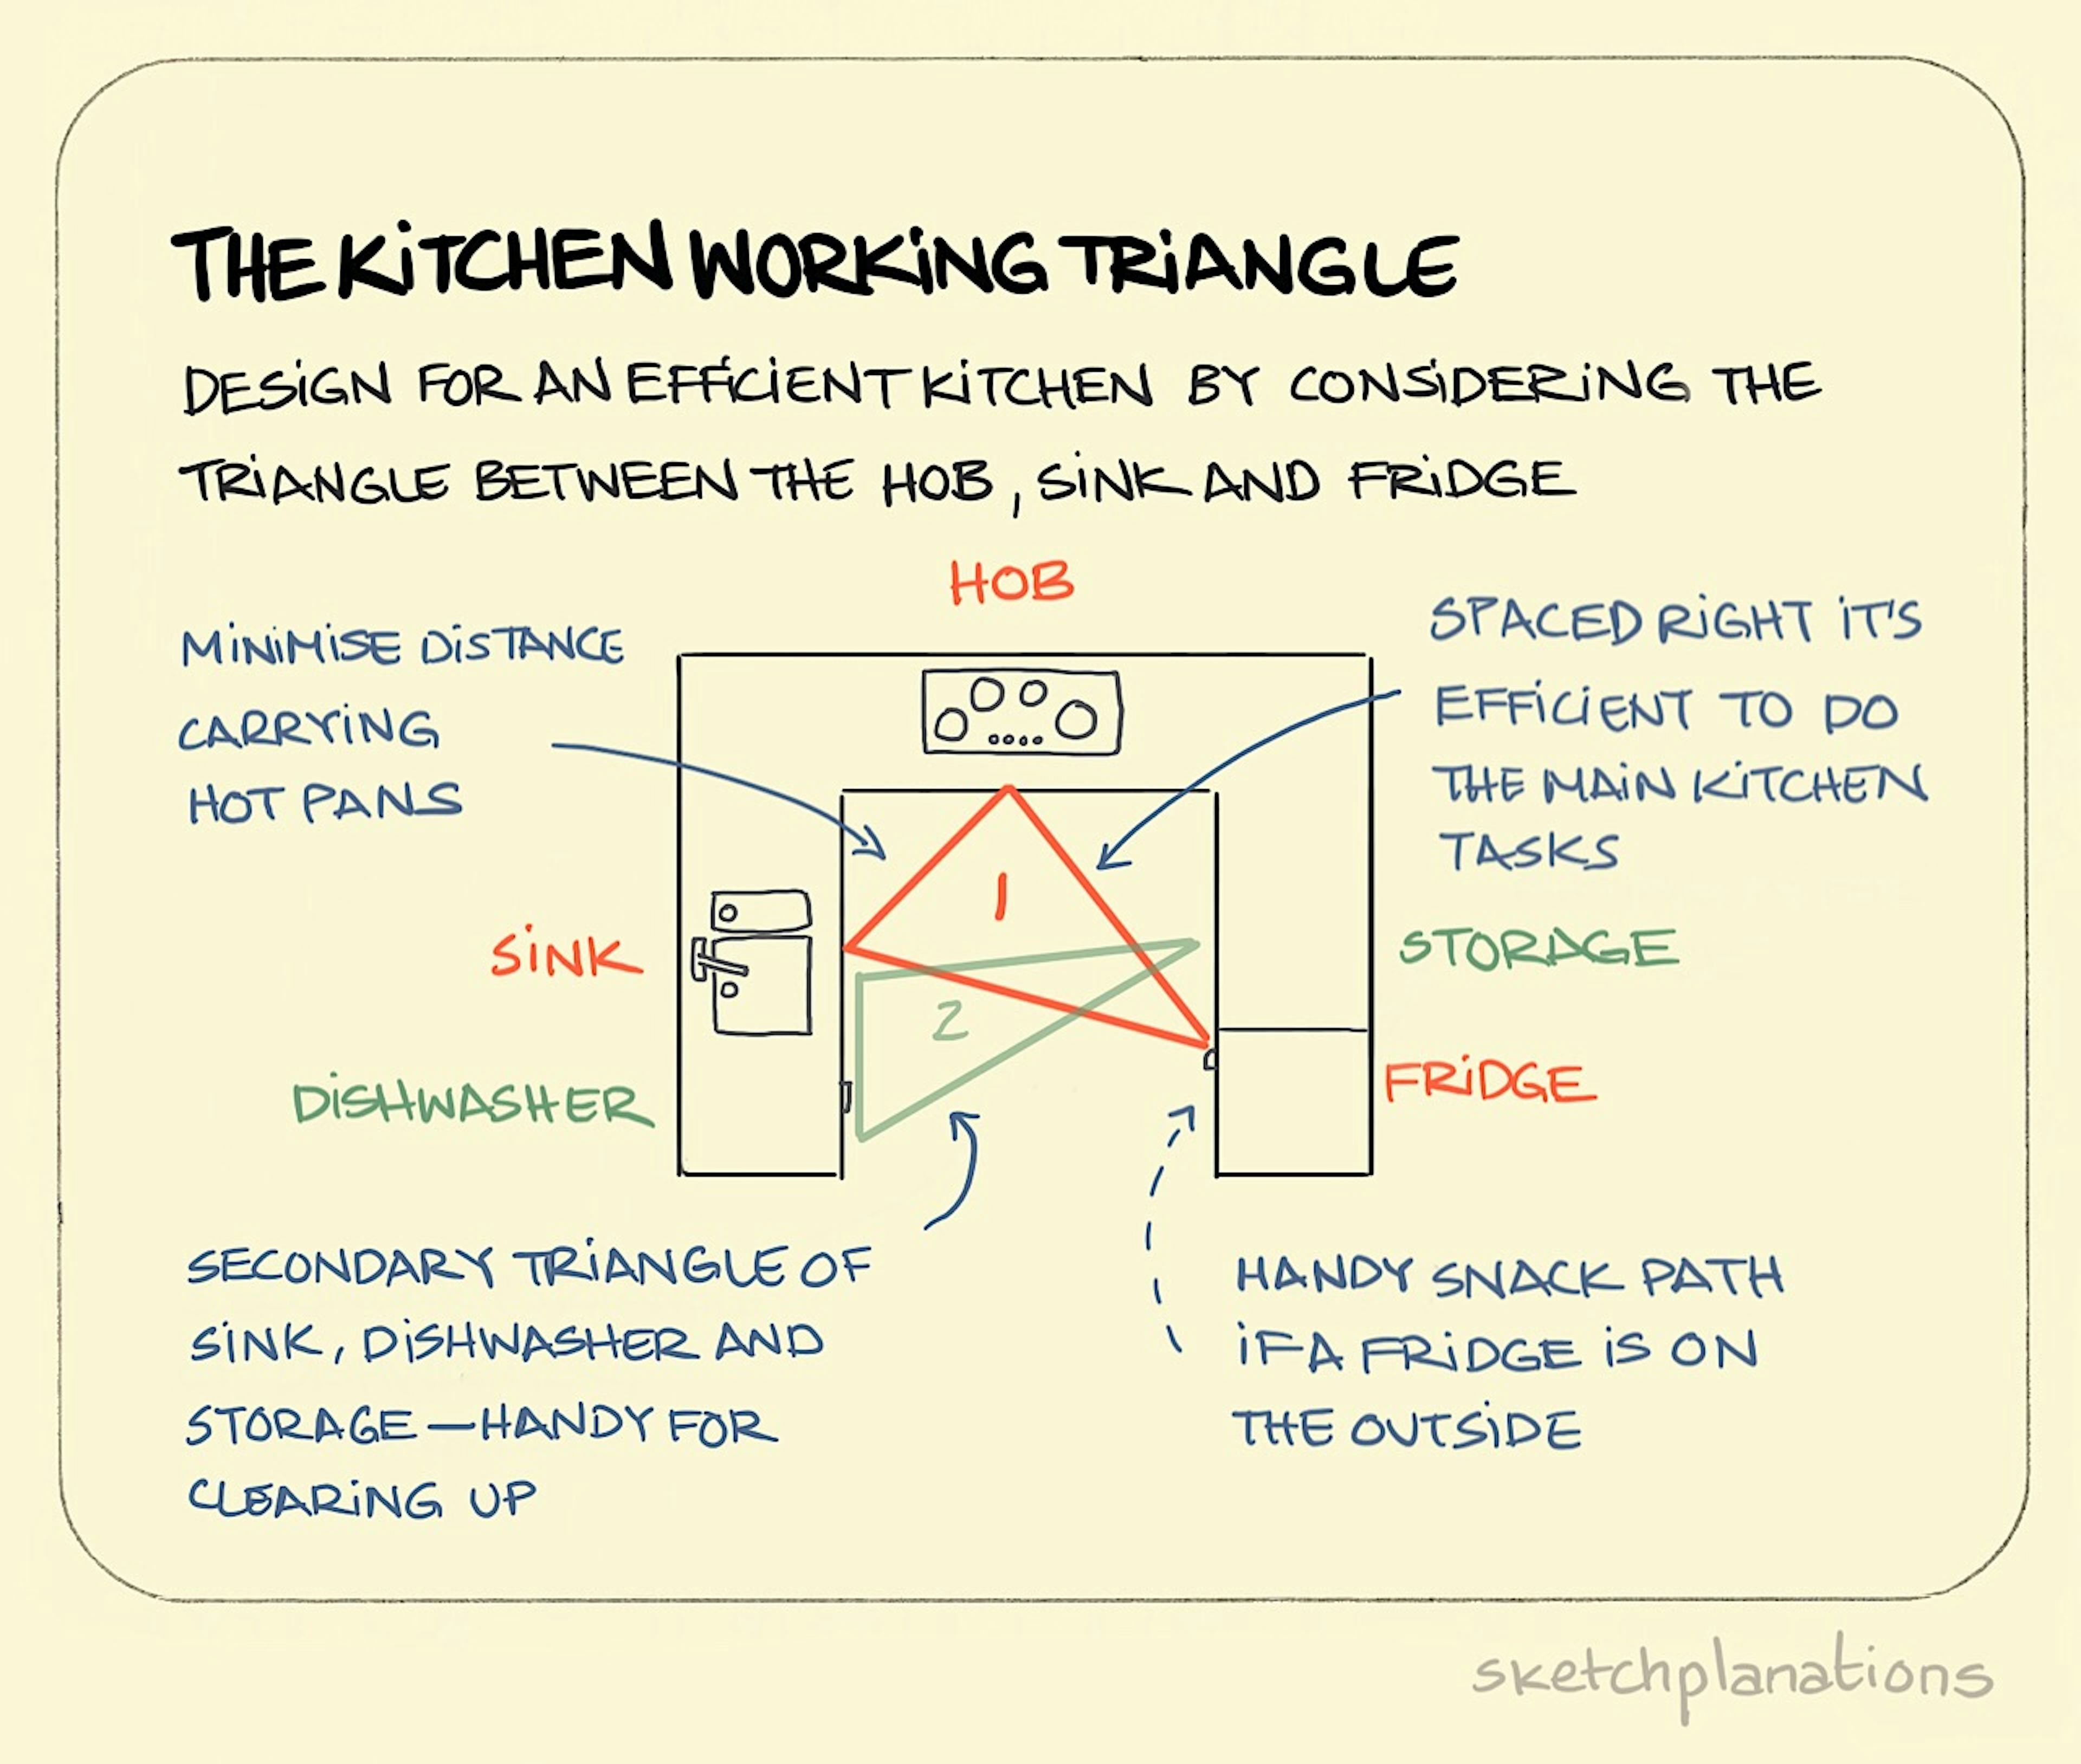 The Kitchen Working Triangle illustration: a plan view of a kitchen is shown with the distances between commonly related appliances and storage highlighted. 